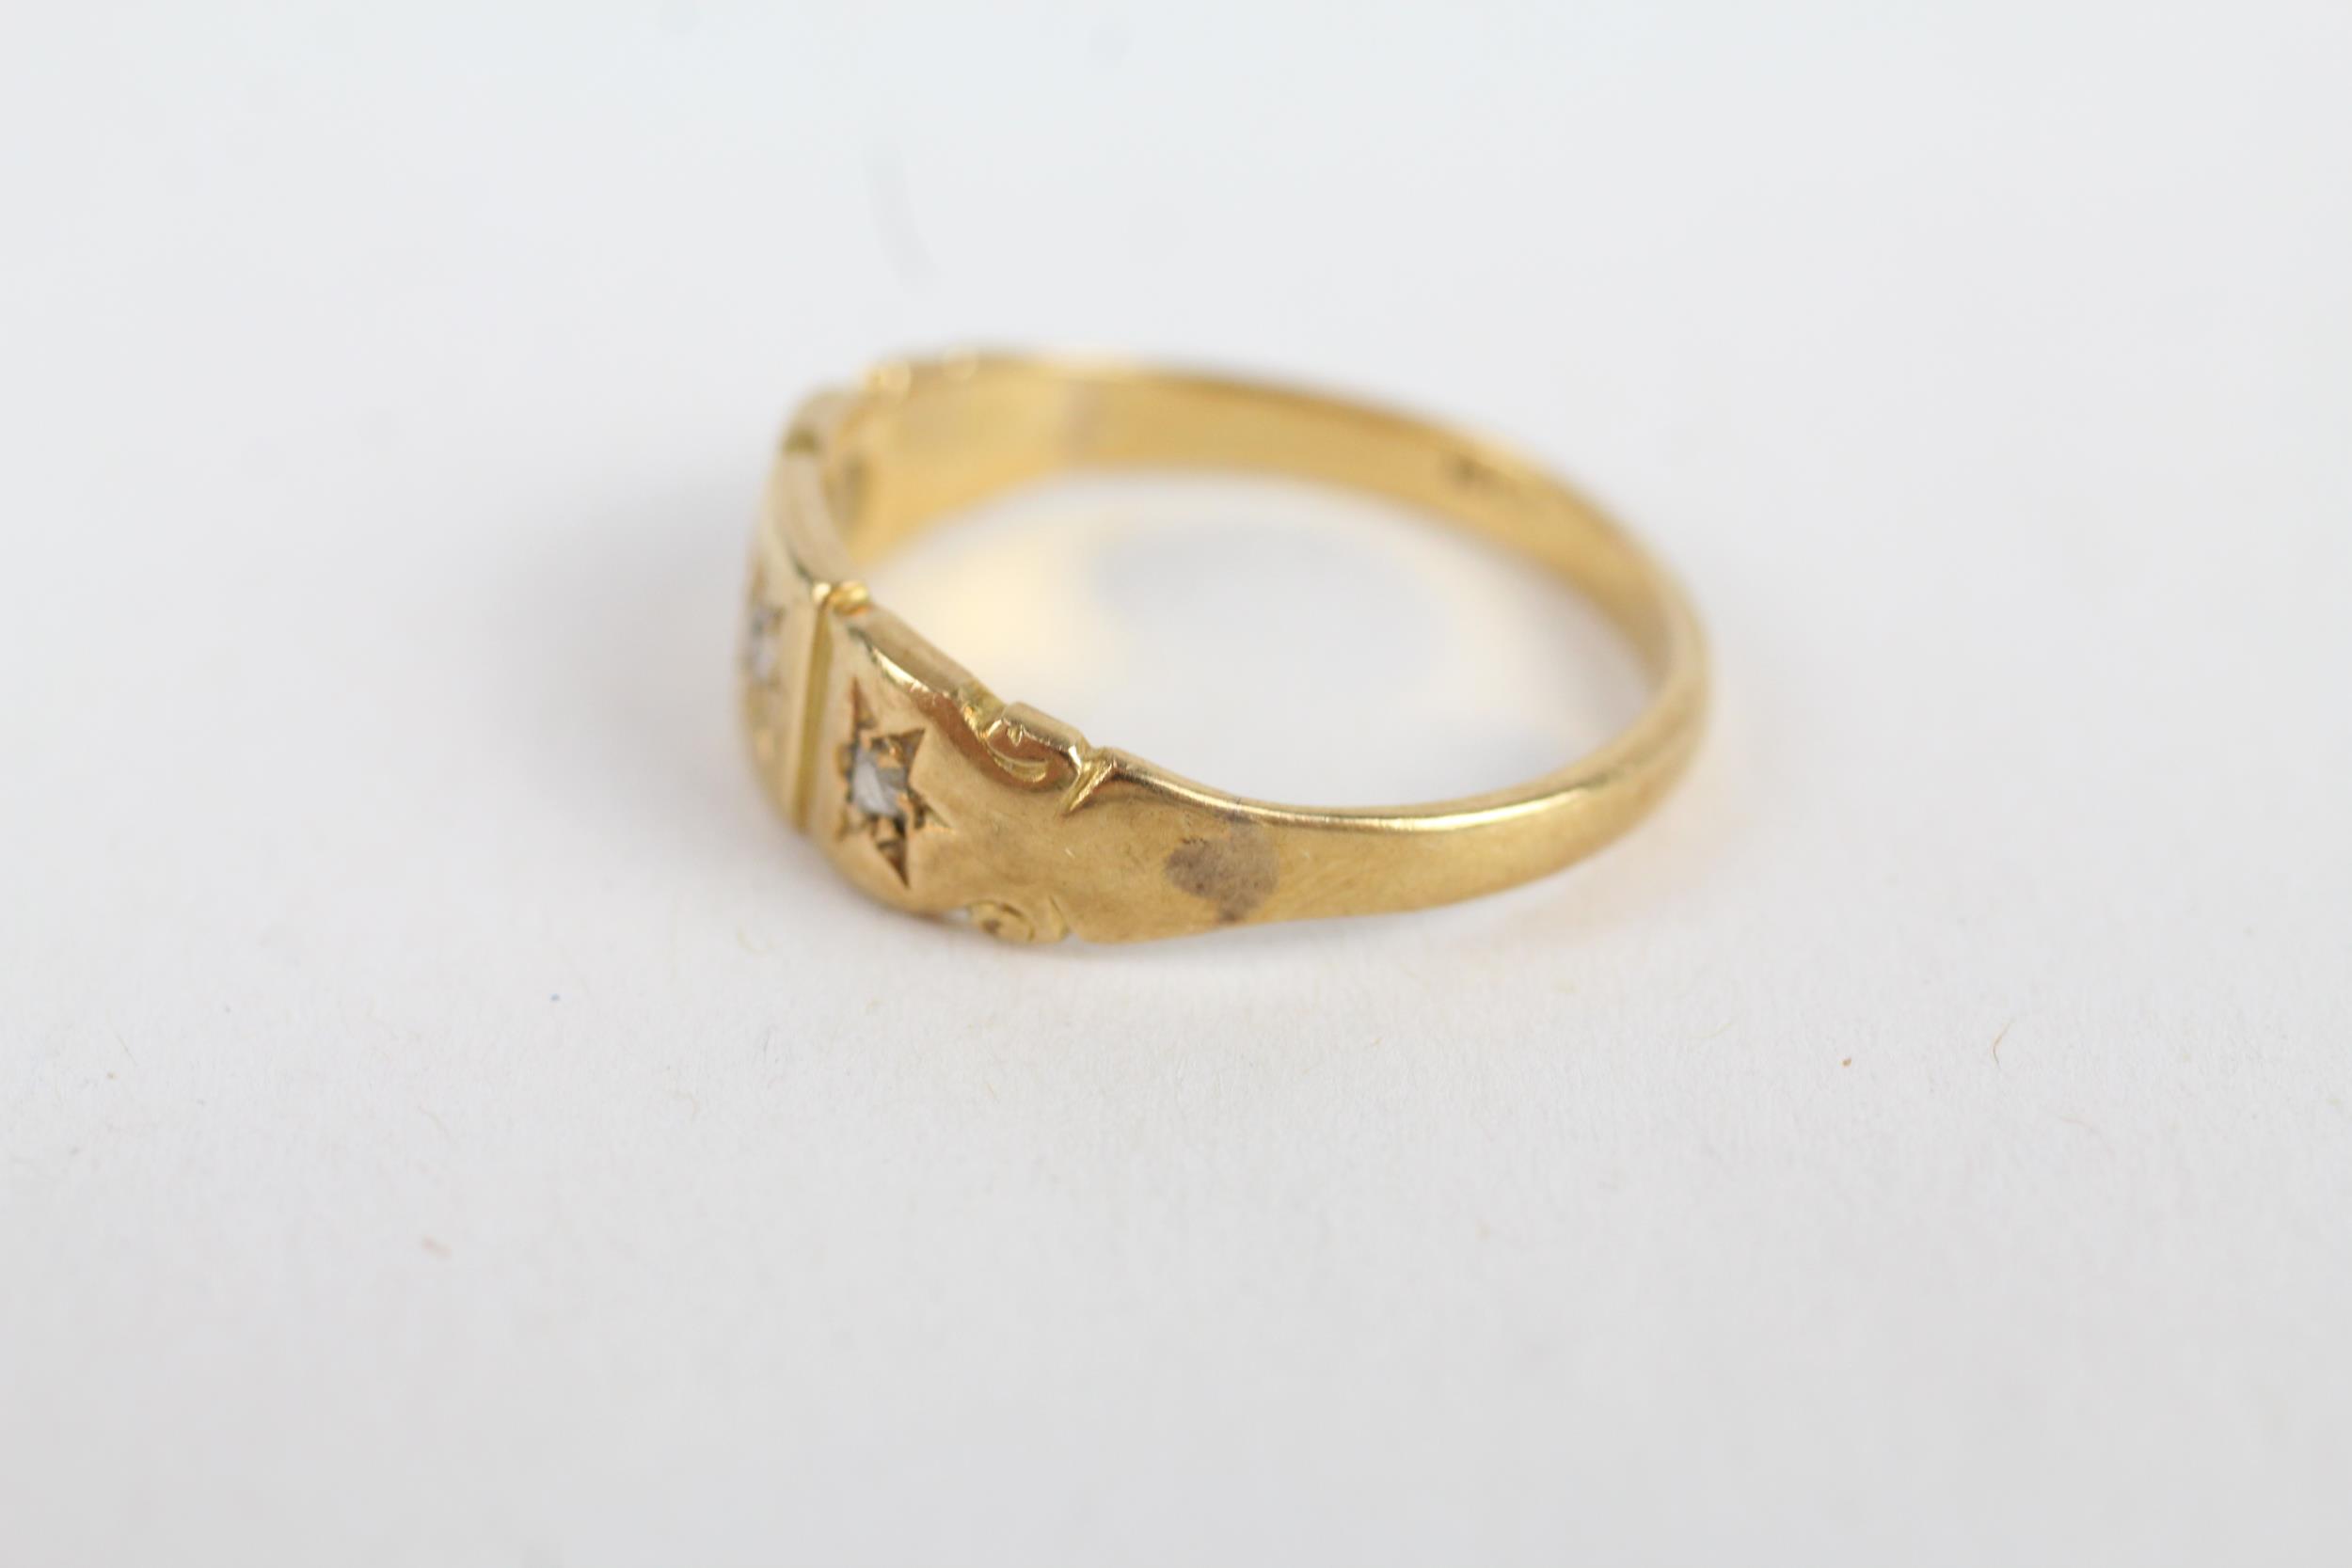 18ct gold antique star set diamond trilogy ring - MISHAPEN - AS SEEN Size N 1/2 - 3.4 g - Image 3 of 4